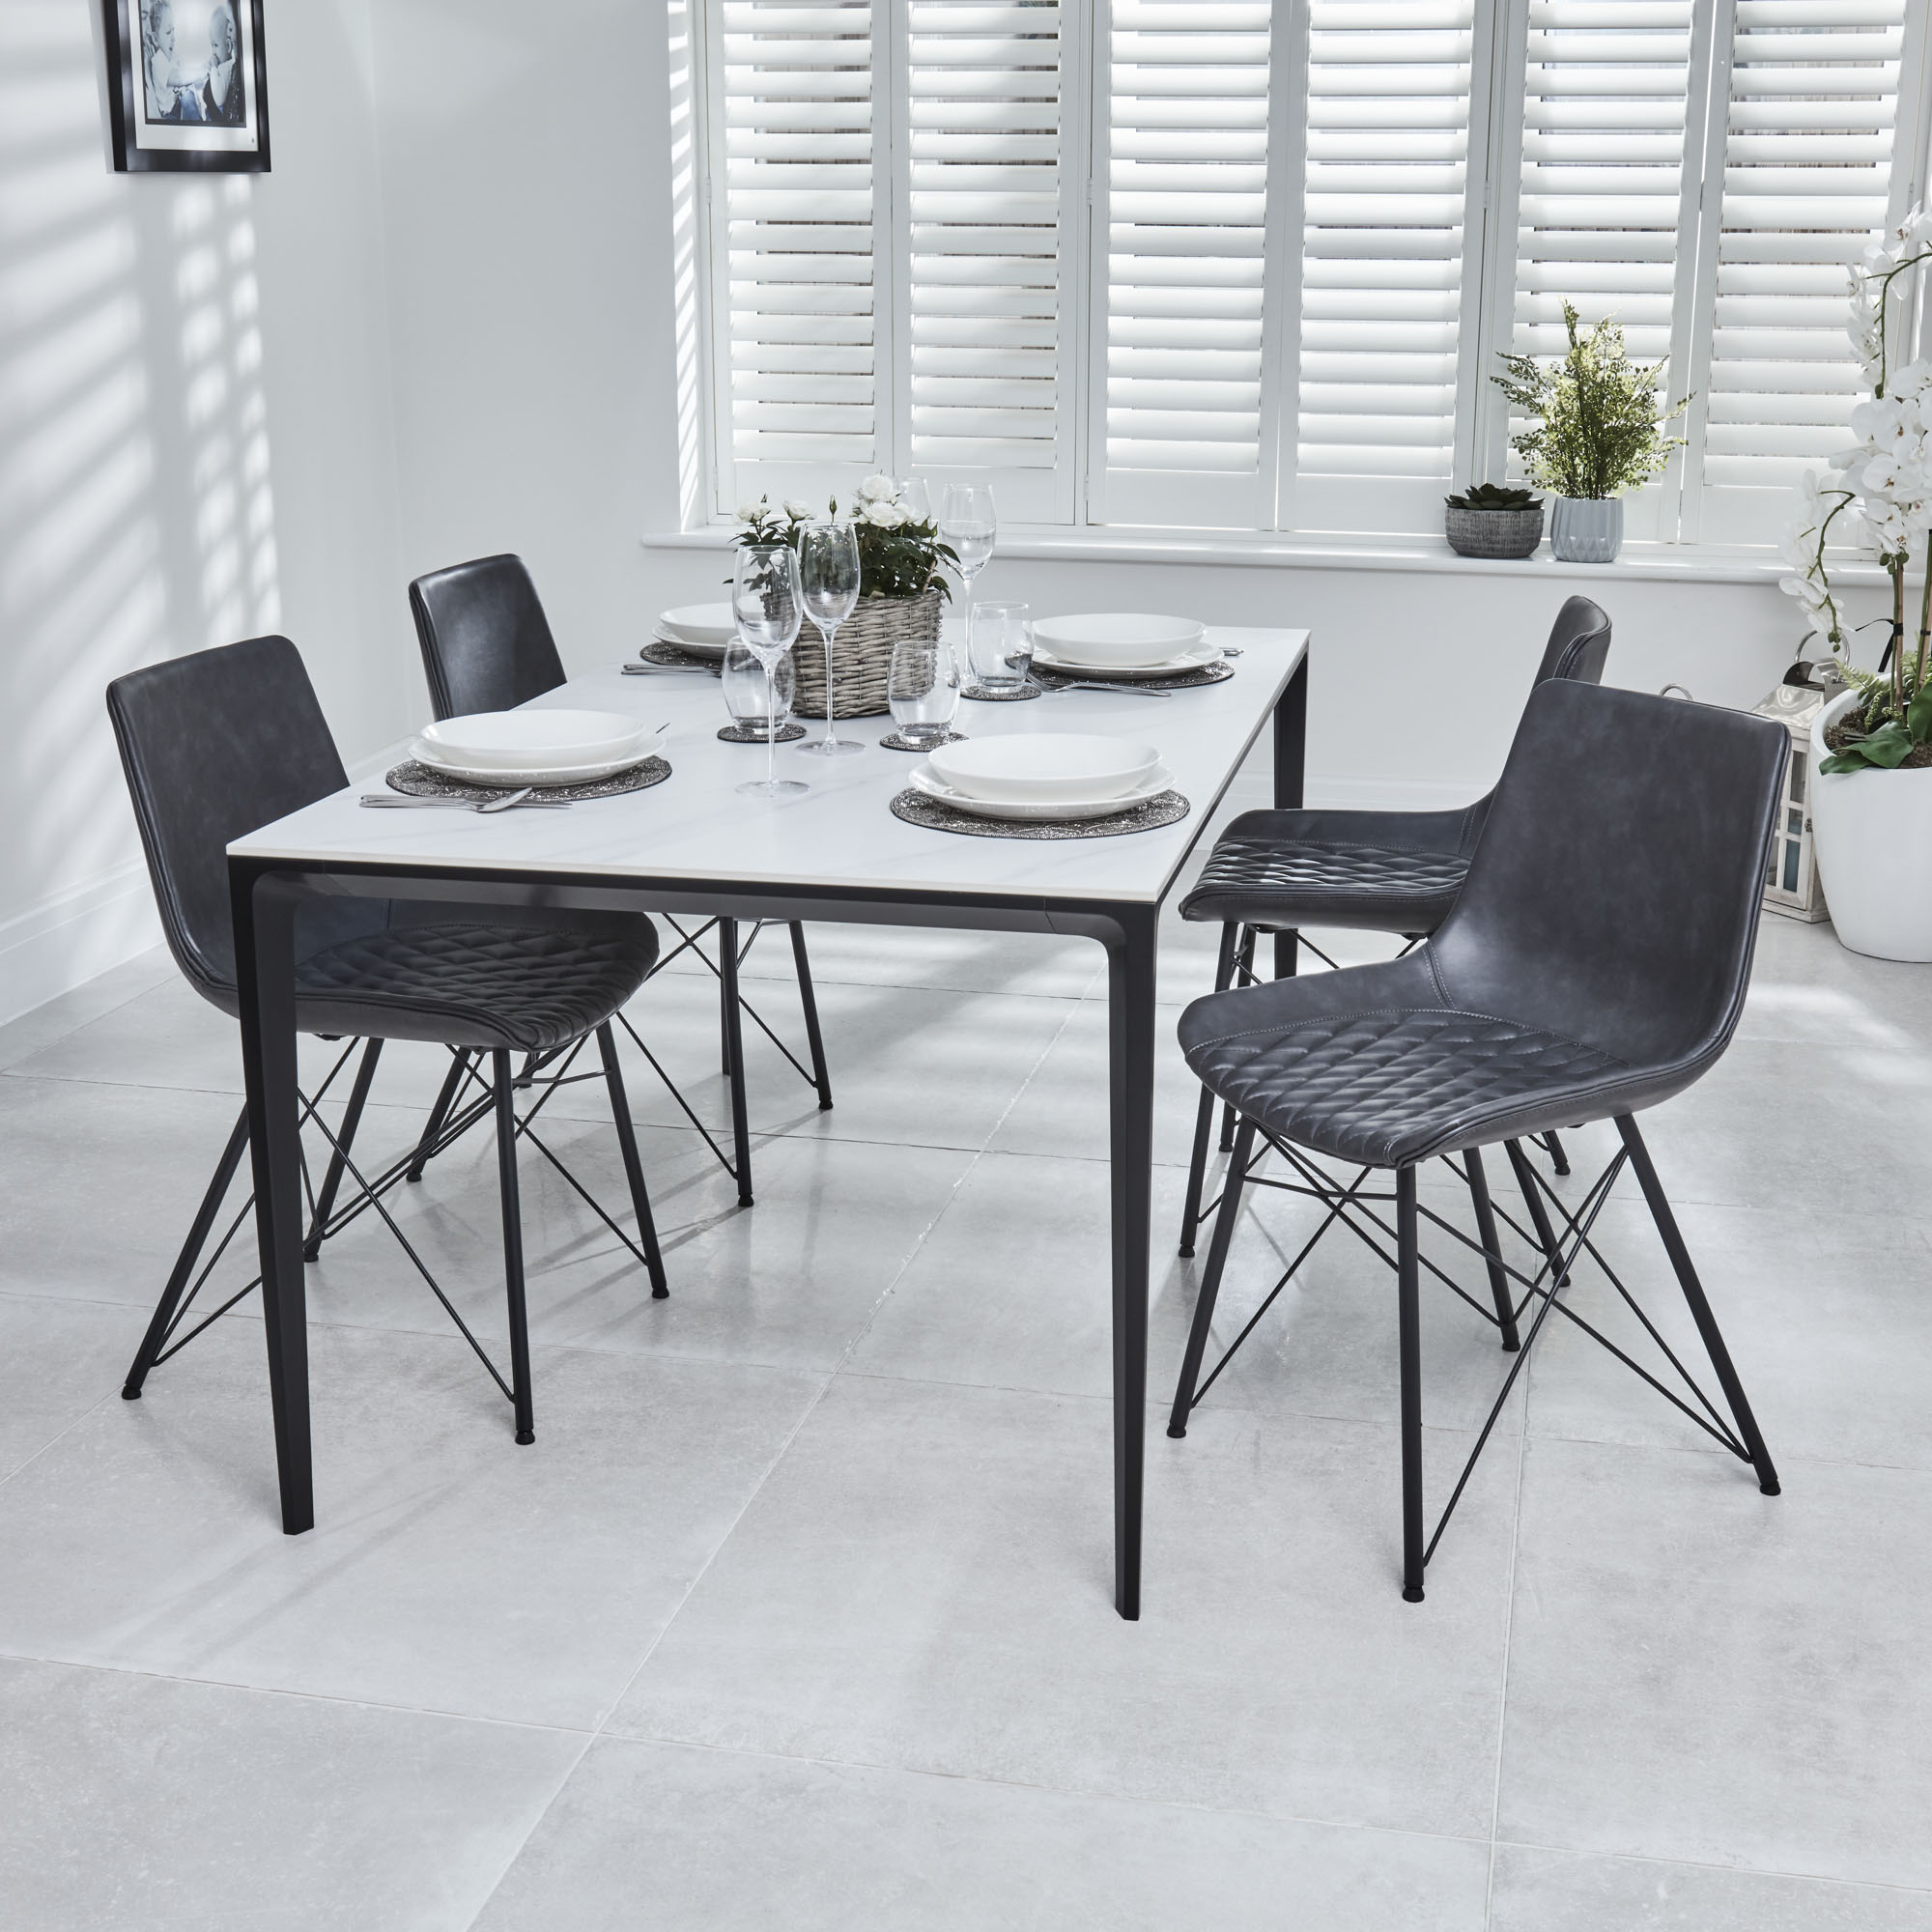 Bellagio 1.6M White Sintered Stone Dining Table Set with 4 x Leon Grey Dining Chairs